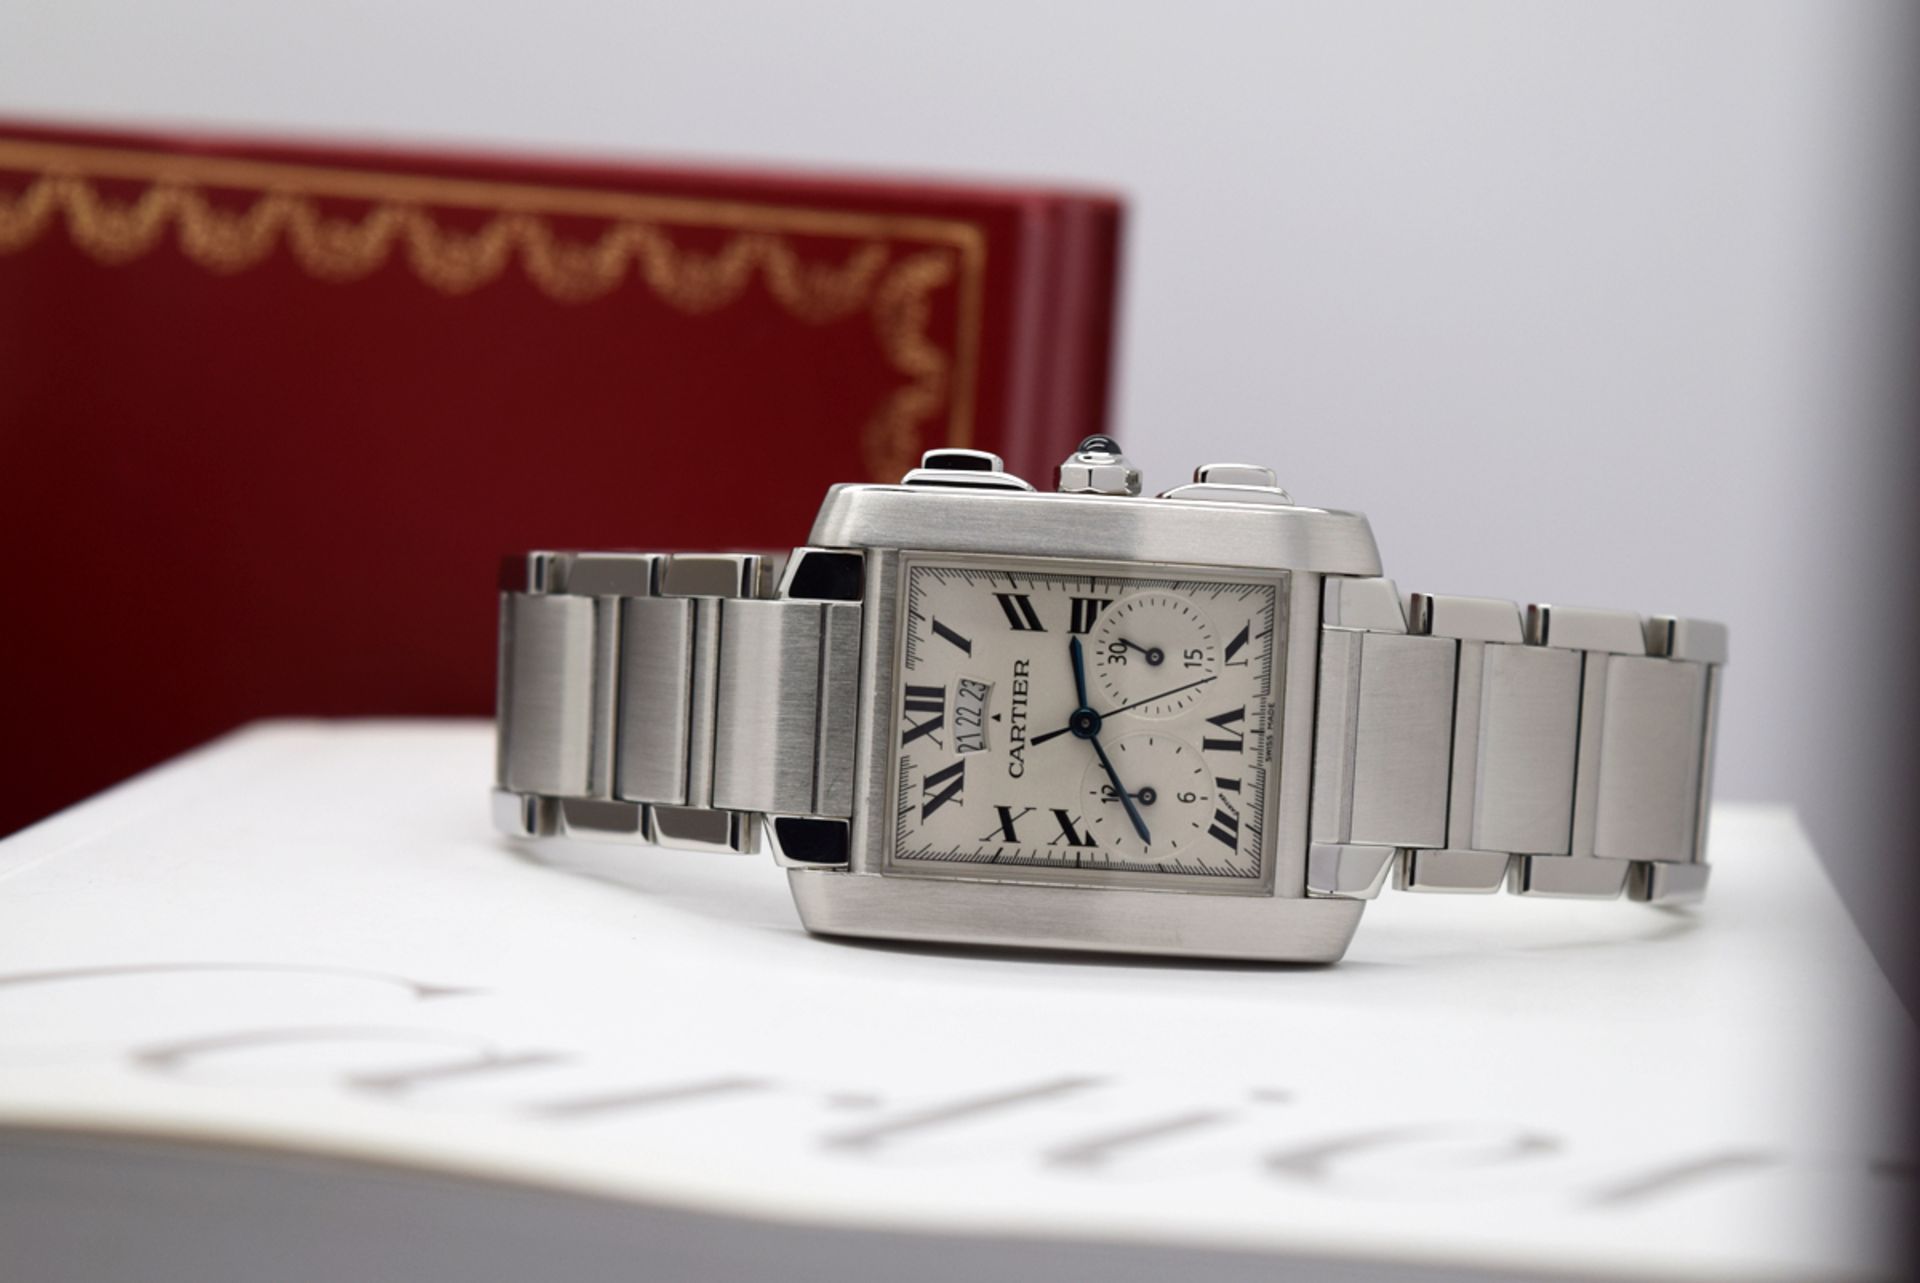 MENS CARTIER CHRONOGRAPH - STAINLESS STEEL TANK (2653 - W51024Q3) - Image 3 of 12